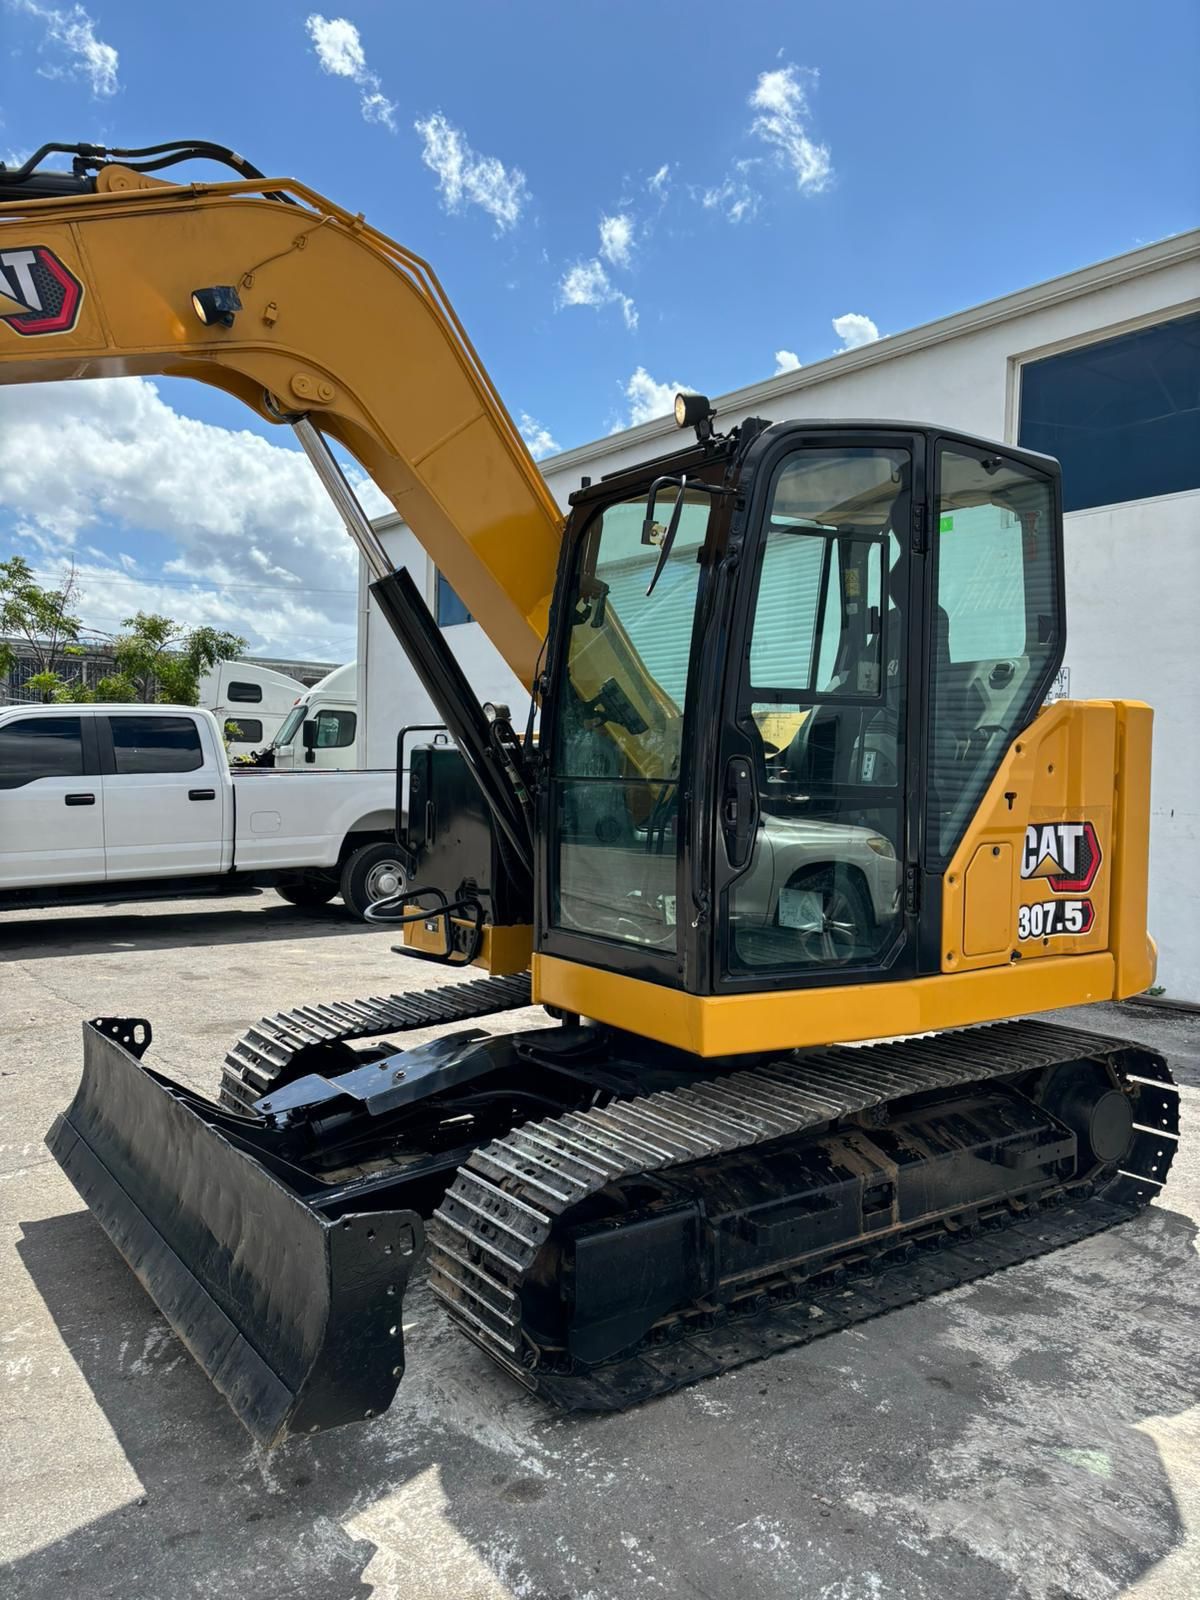 2019 caterpillar 307.5 Mini excavator for sale now! Only 2,647 hours - enclosed cab. A/C and heater